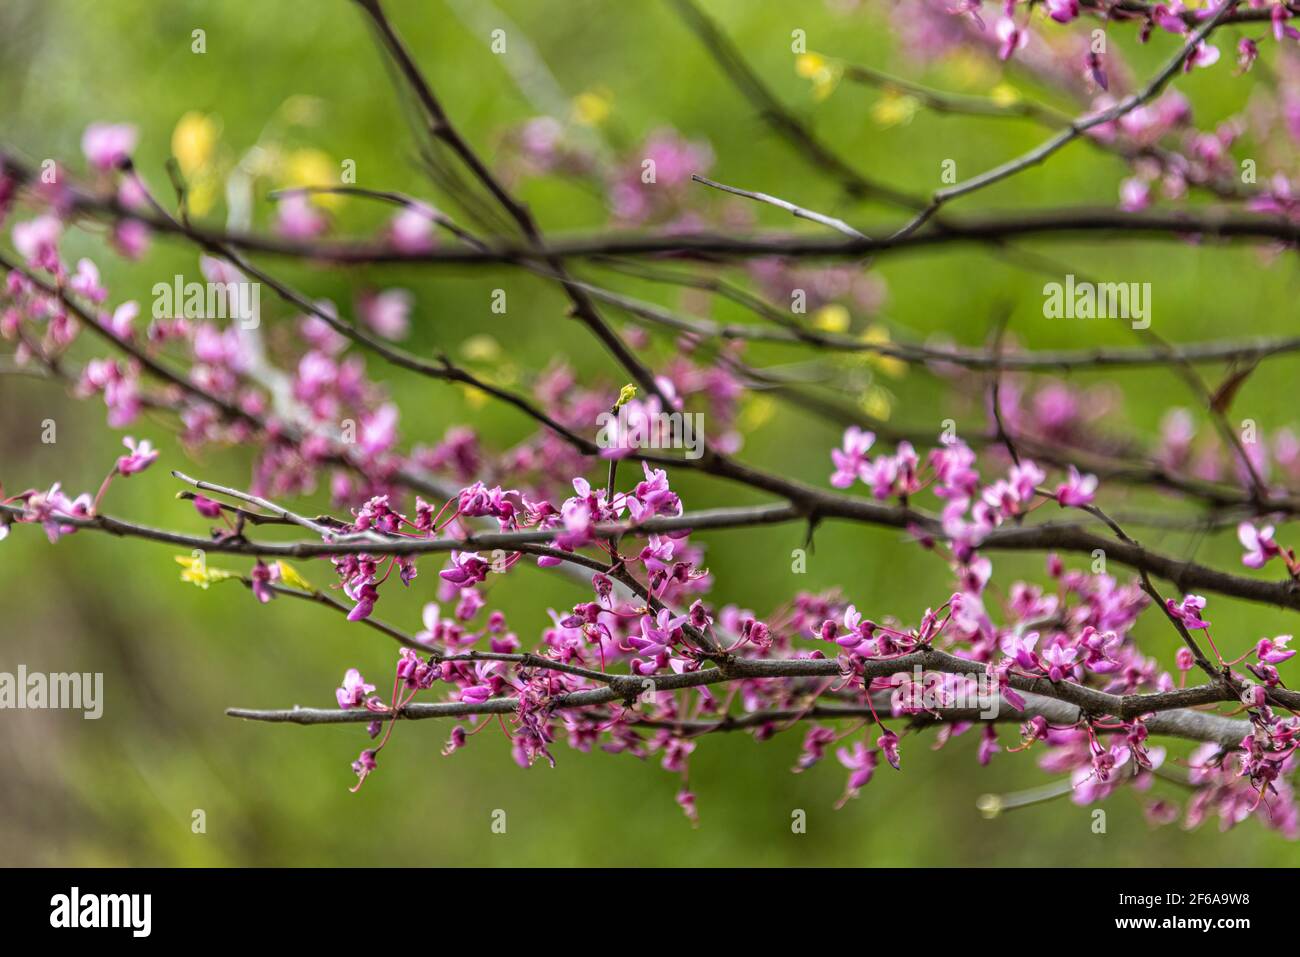 Eastern redbud blossoms in early spring along the Songbird Habitat Trail at Stone Mountain Park in Atlanta, Georgia. (USA) Stock Photo